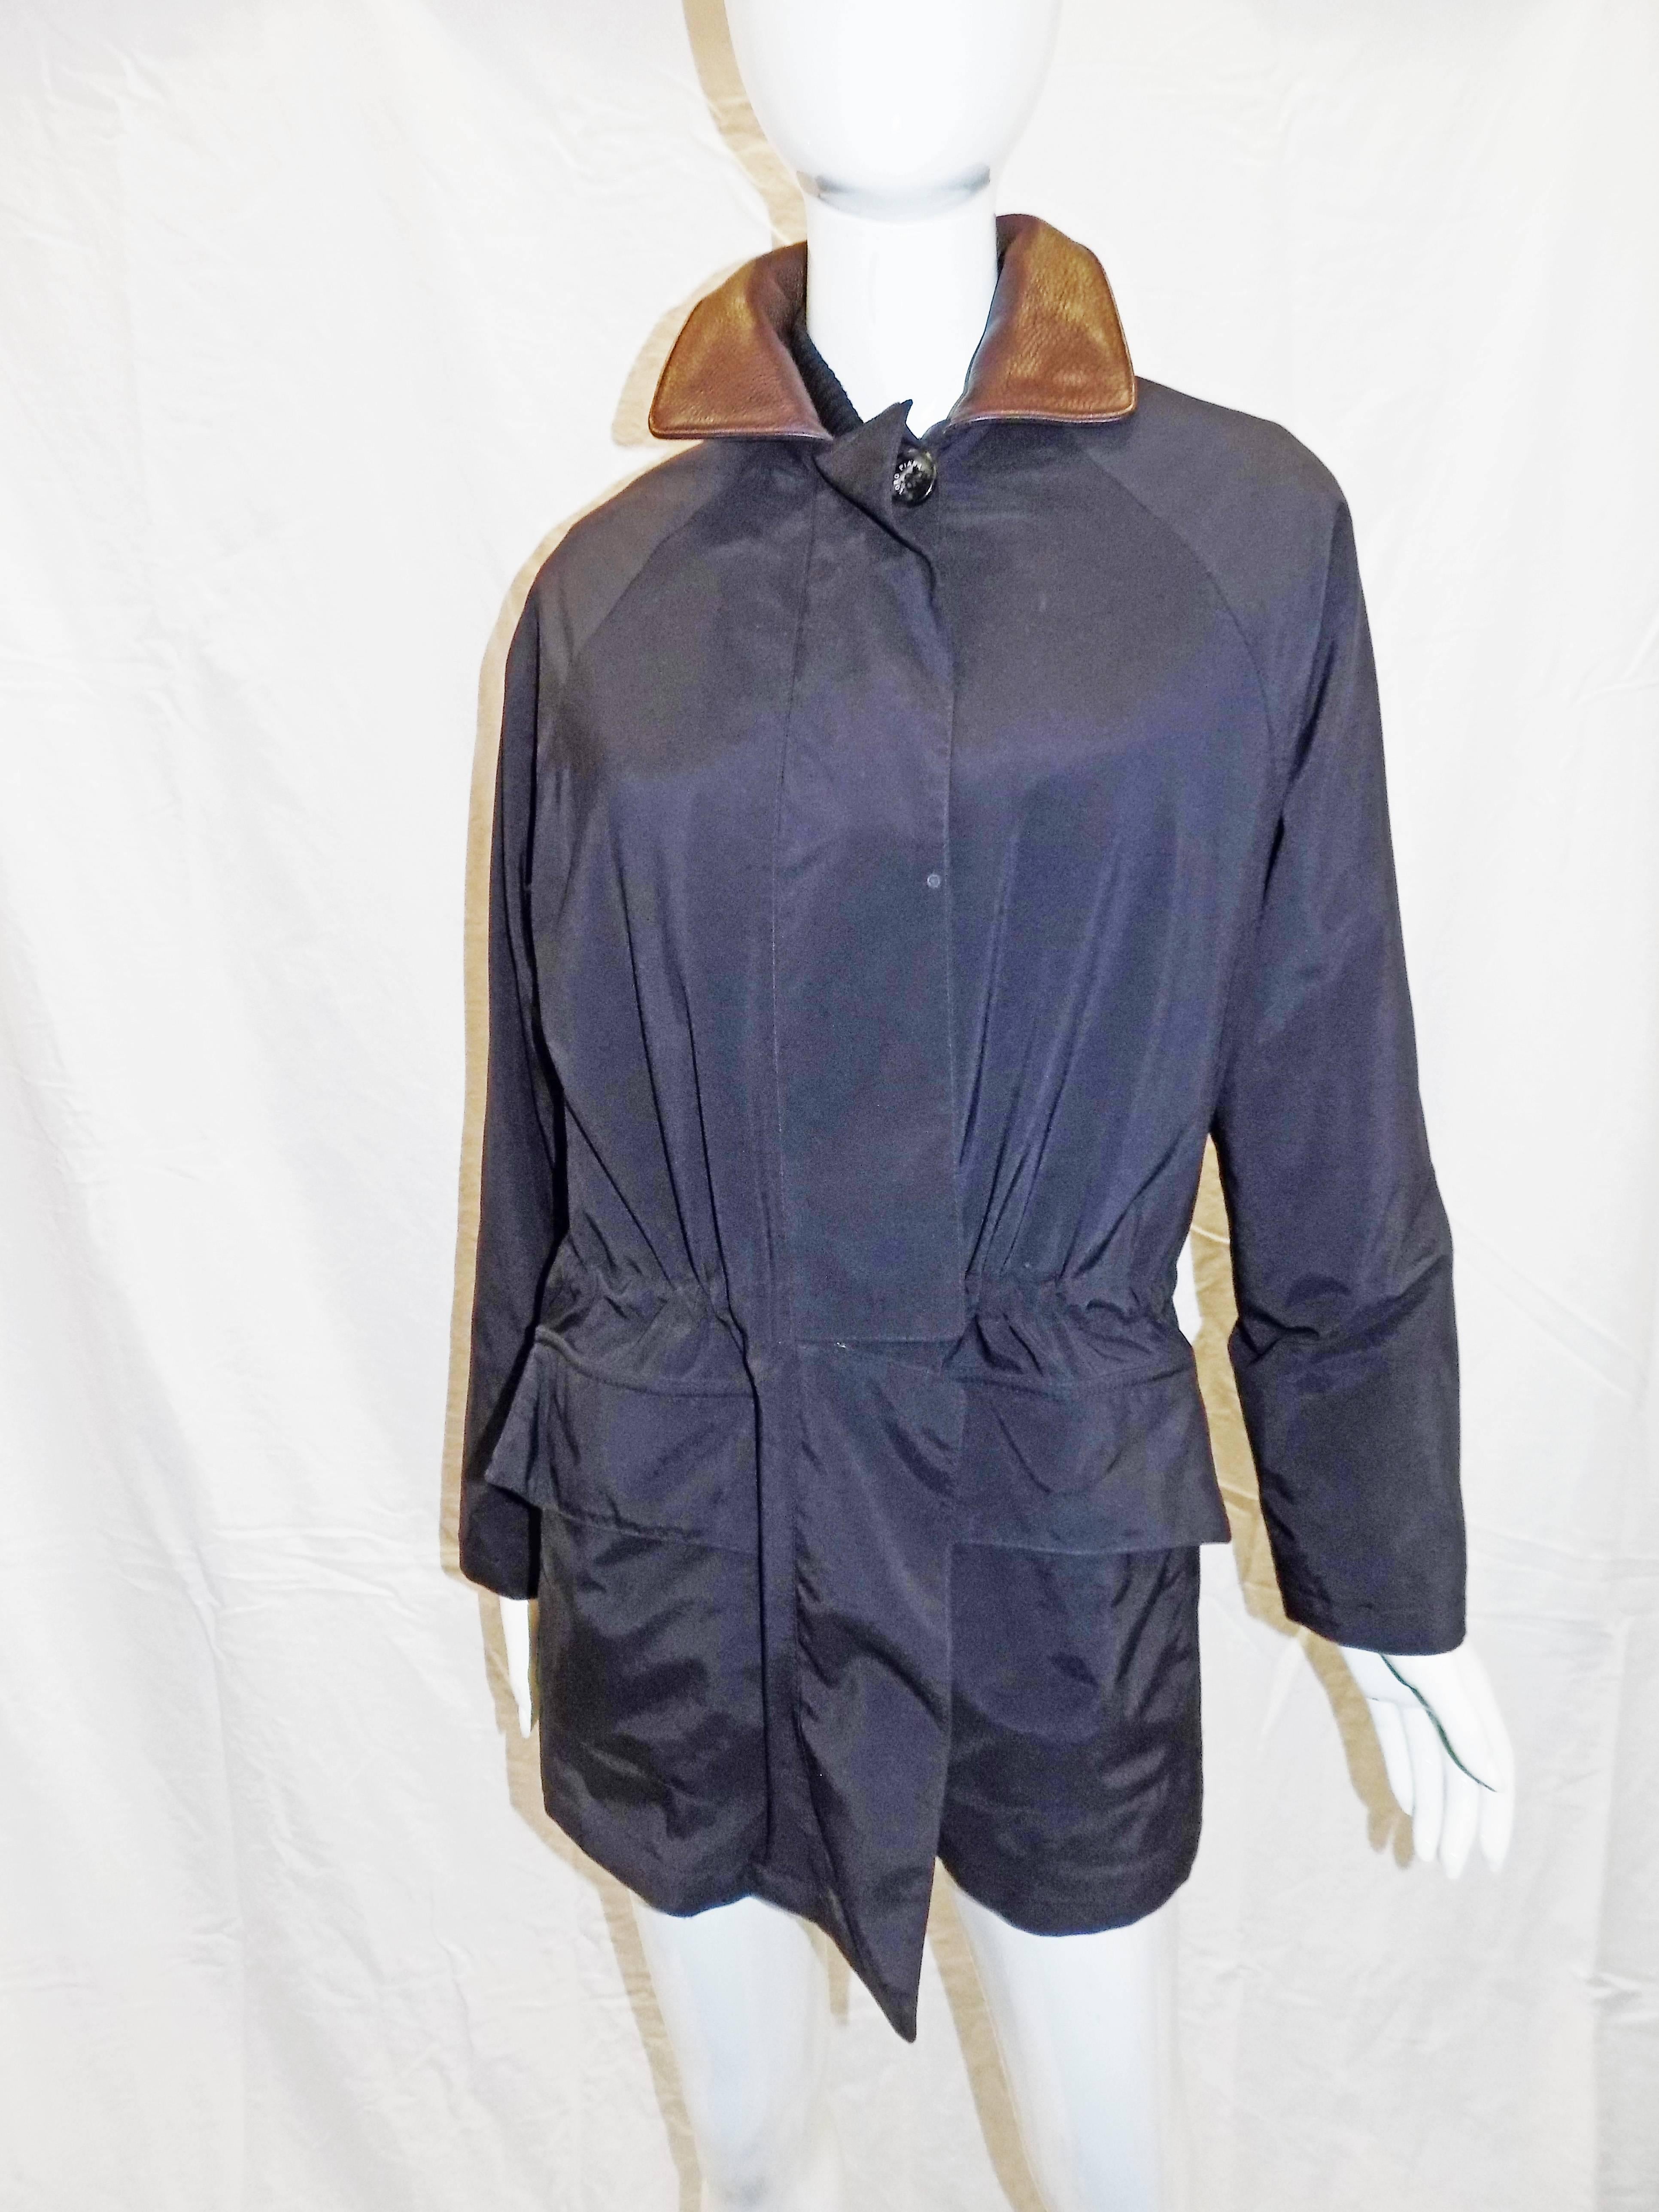 Never worn rare and unique  Rain and storm jacket designer by Loro Piana especially for Italian equestrian team  during Olympic games 1992 in Barcelona. Navy jacket with plaid cotton lining and removable quilted vest with cashmere yellow lining. 